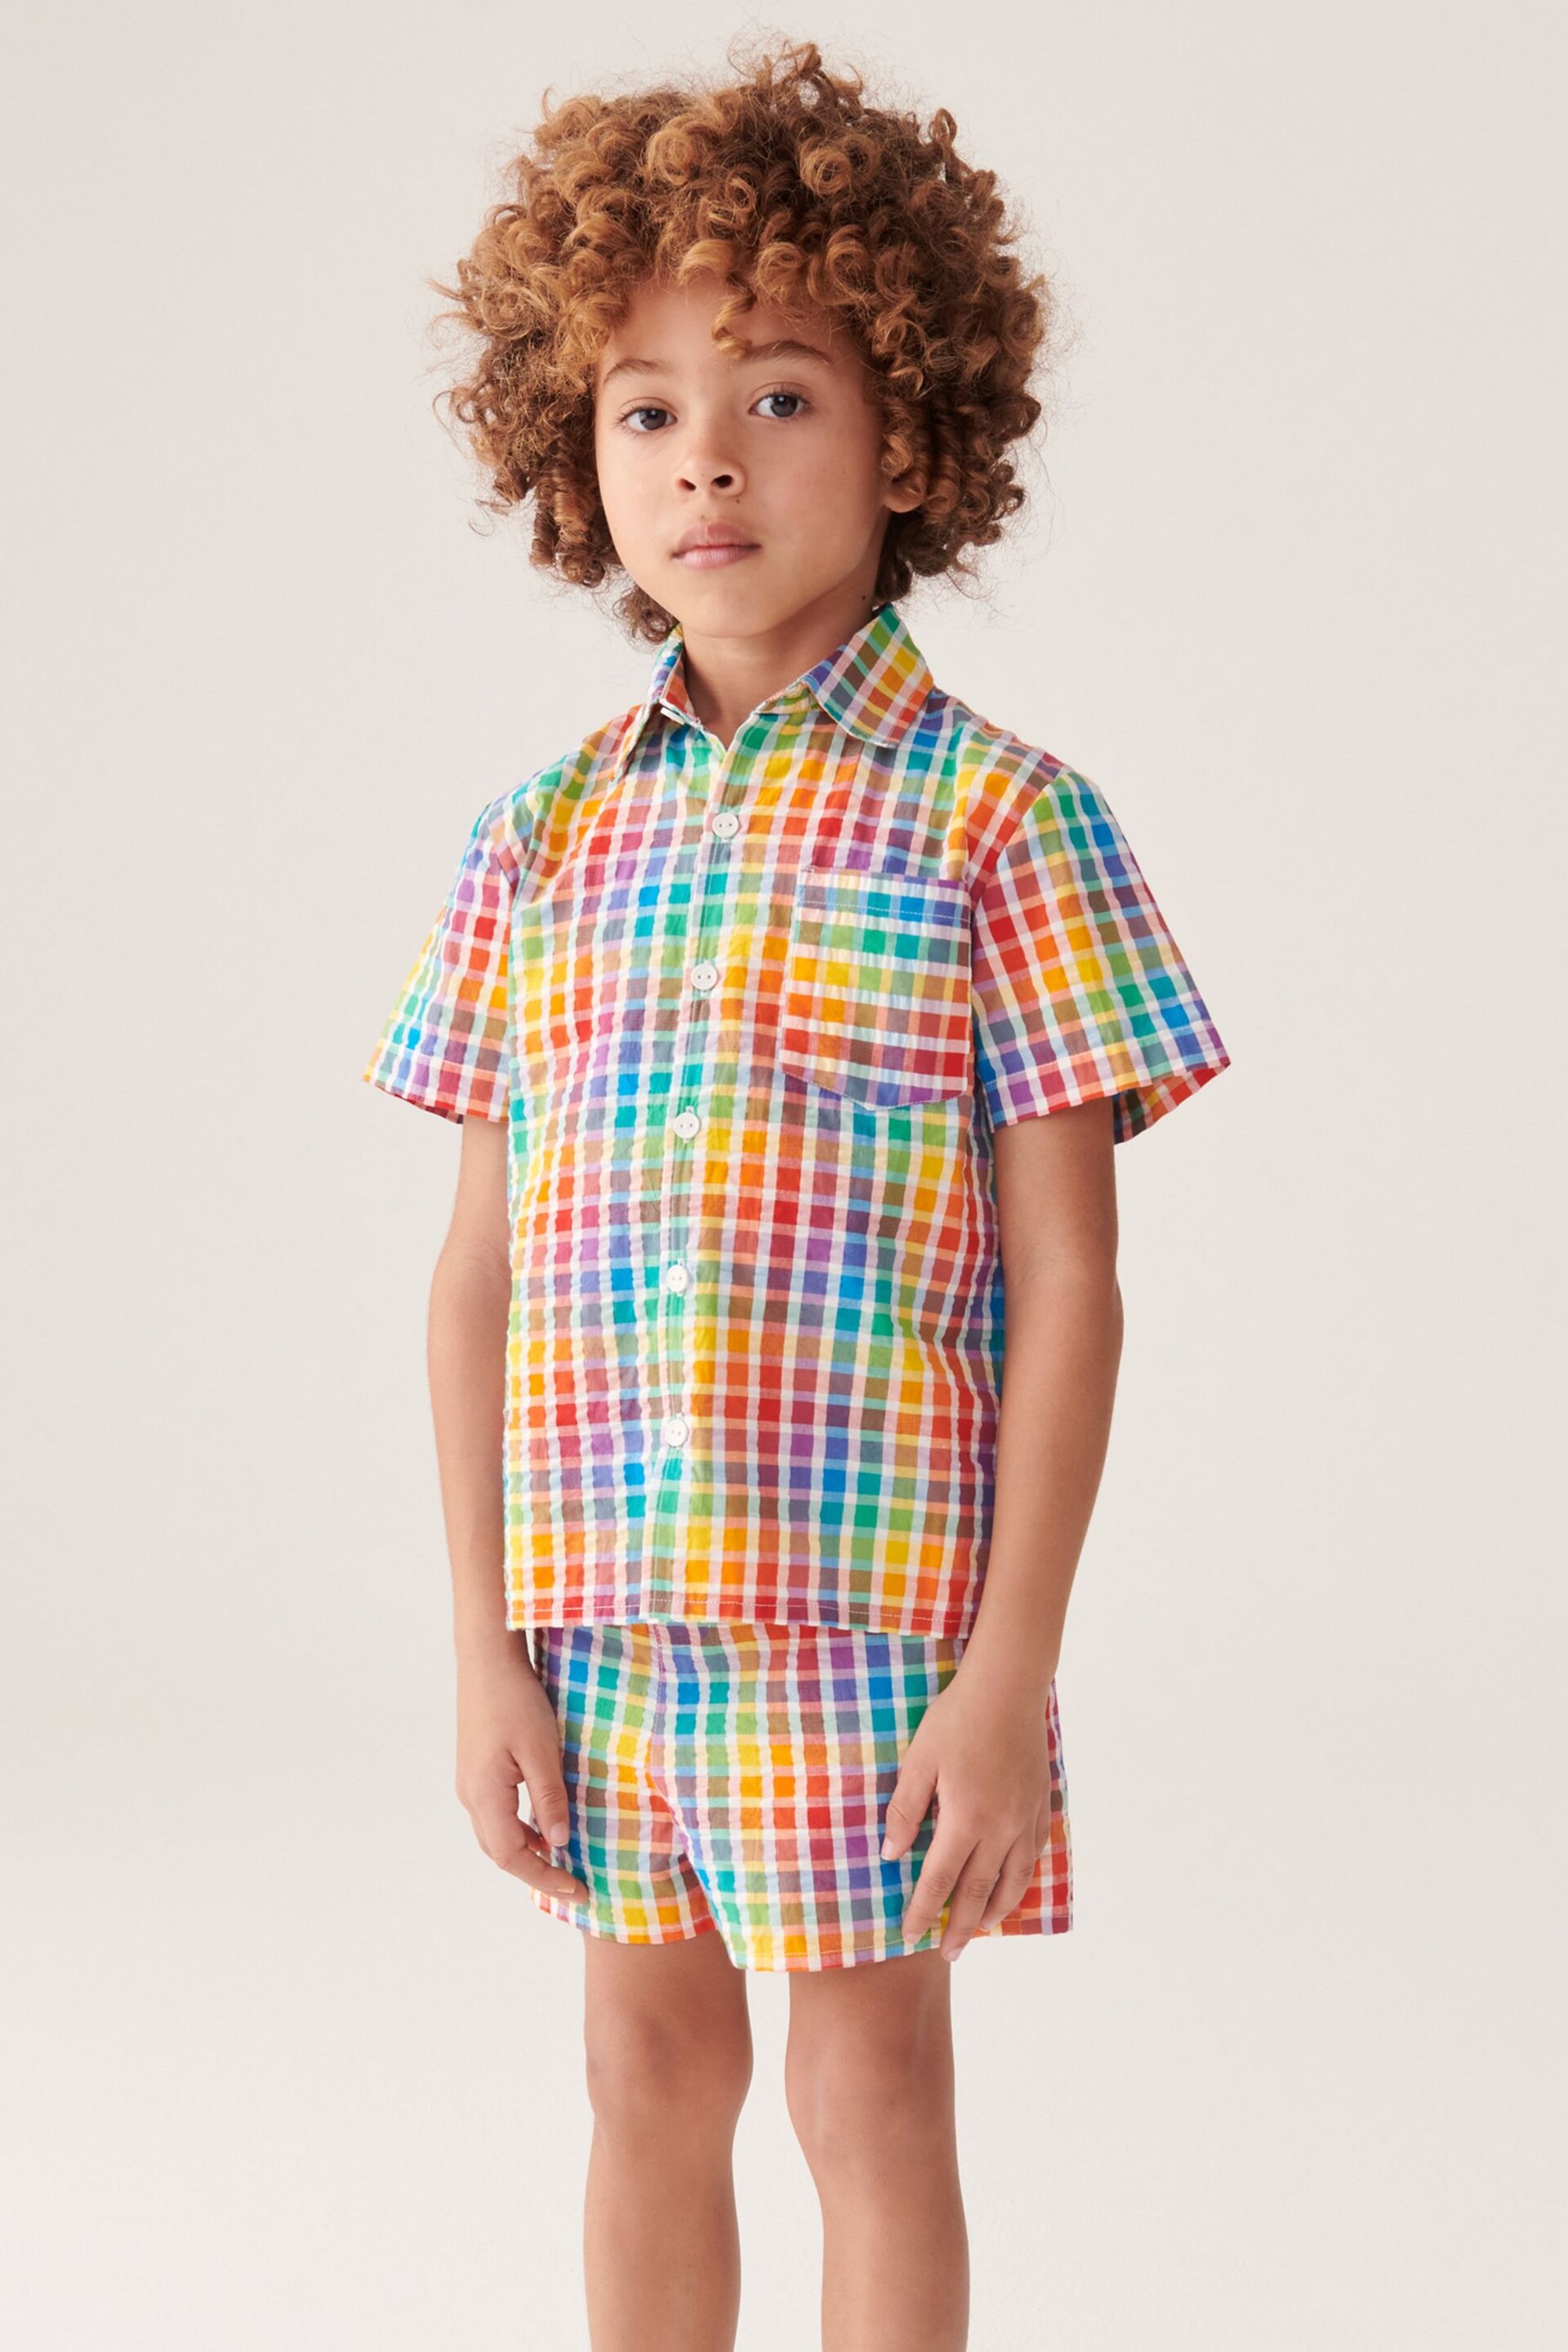 Little Bird by Jools Oliver Multi/Check Colourful Shirt and Short Set - Image 3 of 10